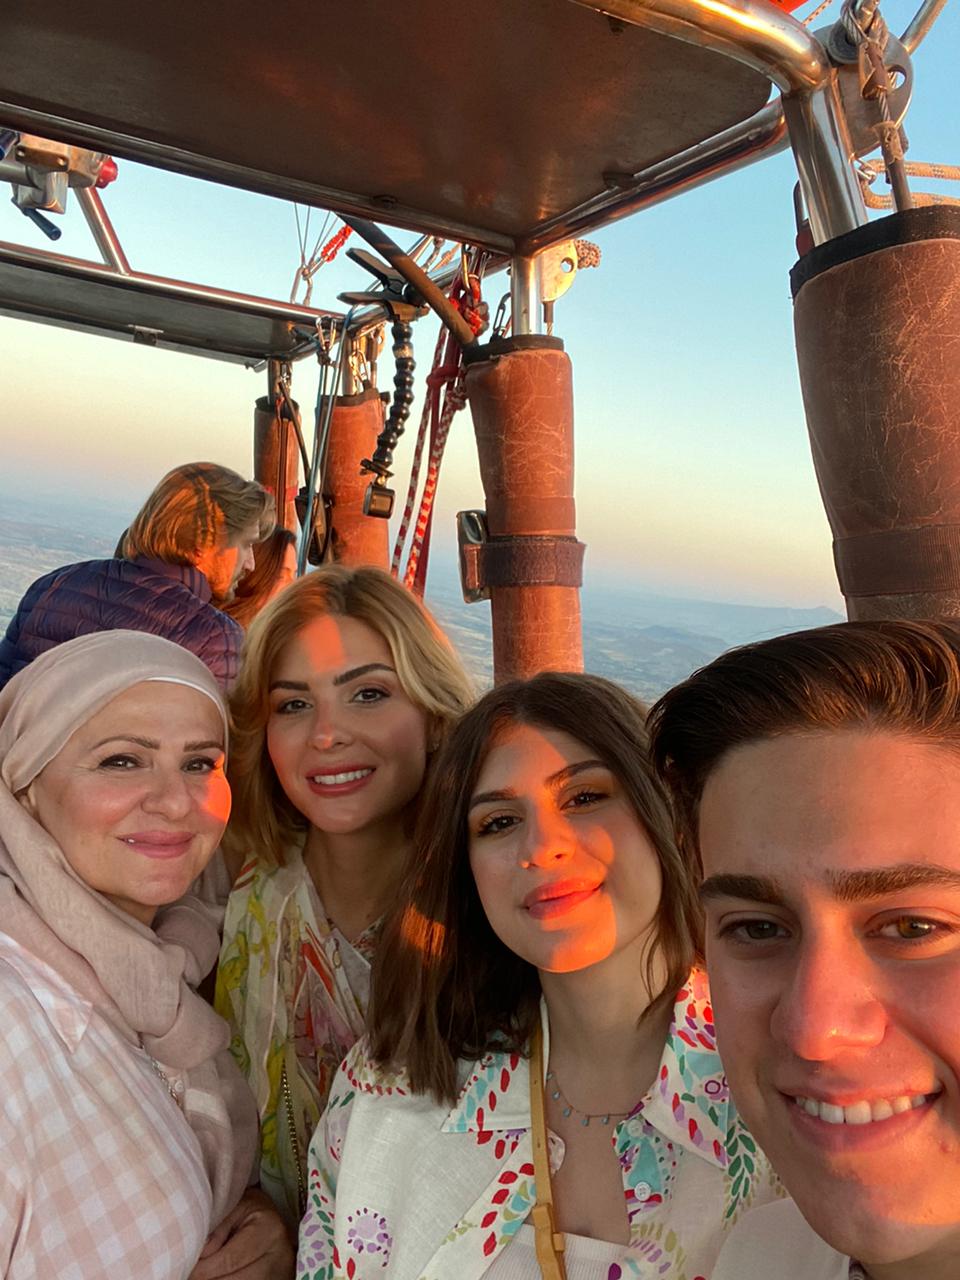 Ahmad+and+Joudi+take+a+quick+photo+with+their+mother+and+older+sister%2C+Leena%2C+during+the+hot+air+balloon+ride.+Leena+lives+in+Dubai+where+she+works+as+an+Instagram+influencer%2C+and+this+was+their+first+time+seeing+her+in+almost+three+years.+%E2%80%9CI+was+shocked+to+see+her+because+I+hadn%E2%80%99t+seen+her+in+so+long.+When+we+saw+each+other%2C+we+both+kind+of+ran+towards+one+another%2C%E2%80%9D+Joudi+said.+%E2%80%9CShe+was+in+Cappadocia+for+the+%5Bmusic%5D+festival+because+%5Ba+brand%5D+reached+out+and+invited+her+so+that+she+can+post+about+it.%E2%80%9D